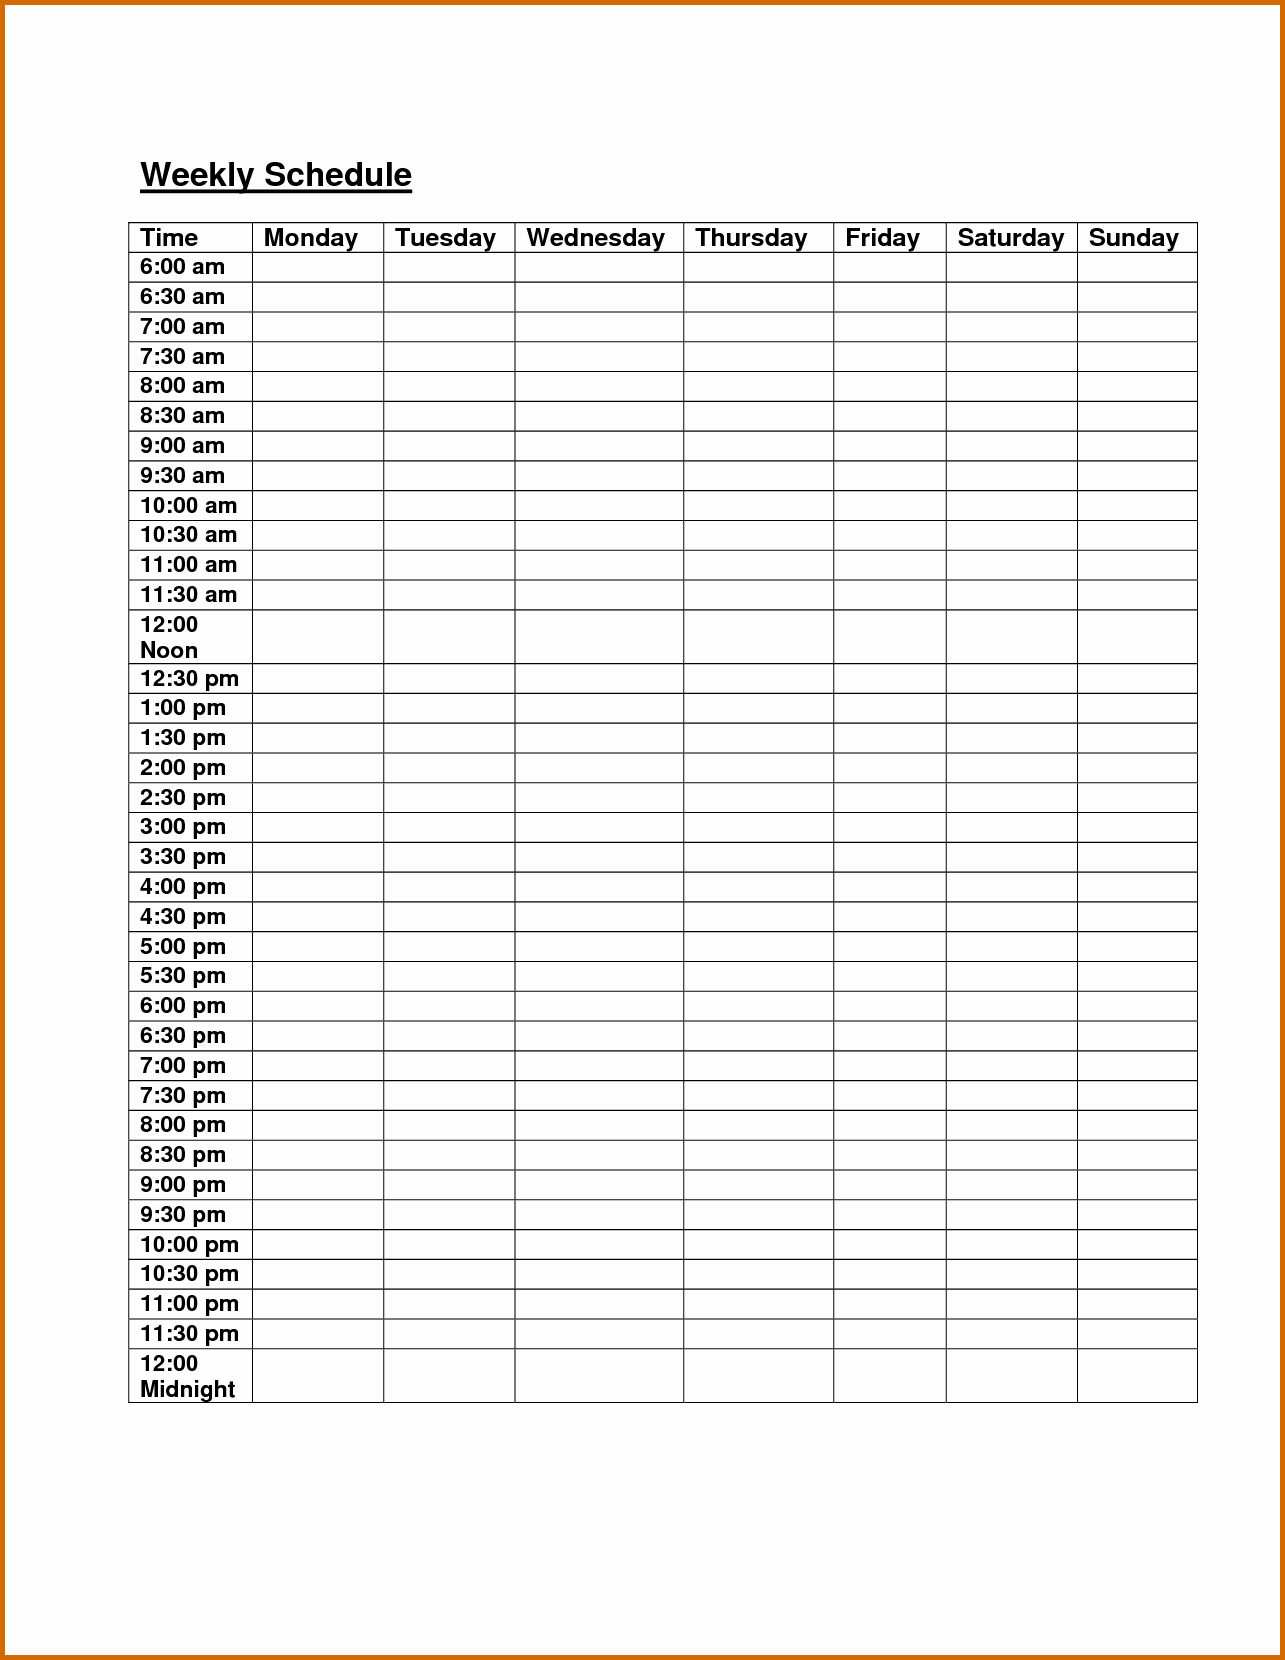 Weekly Schedule with Times Template Awesome 10 Weekly Class Schedule Template Printable